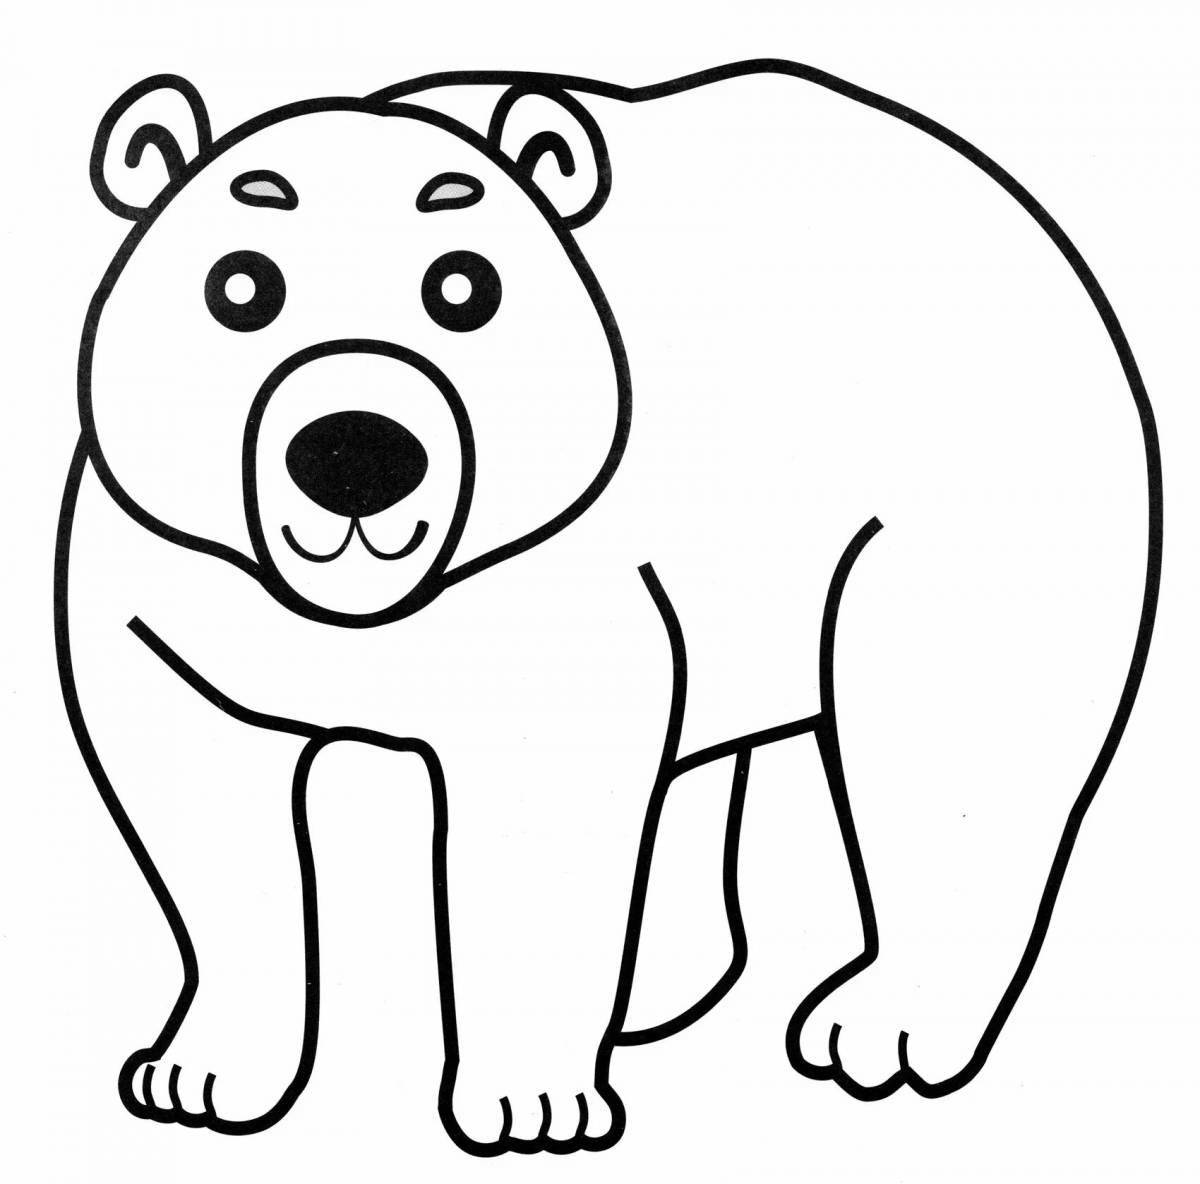 Exciting bear coloring for kids